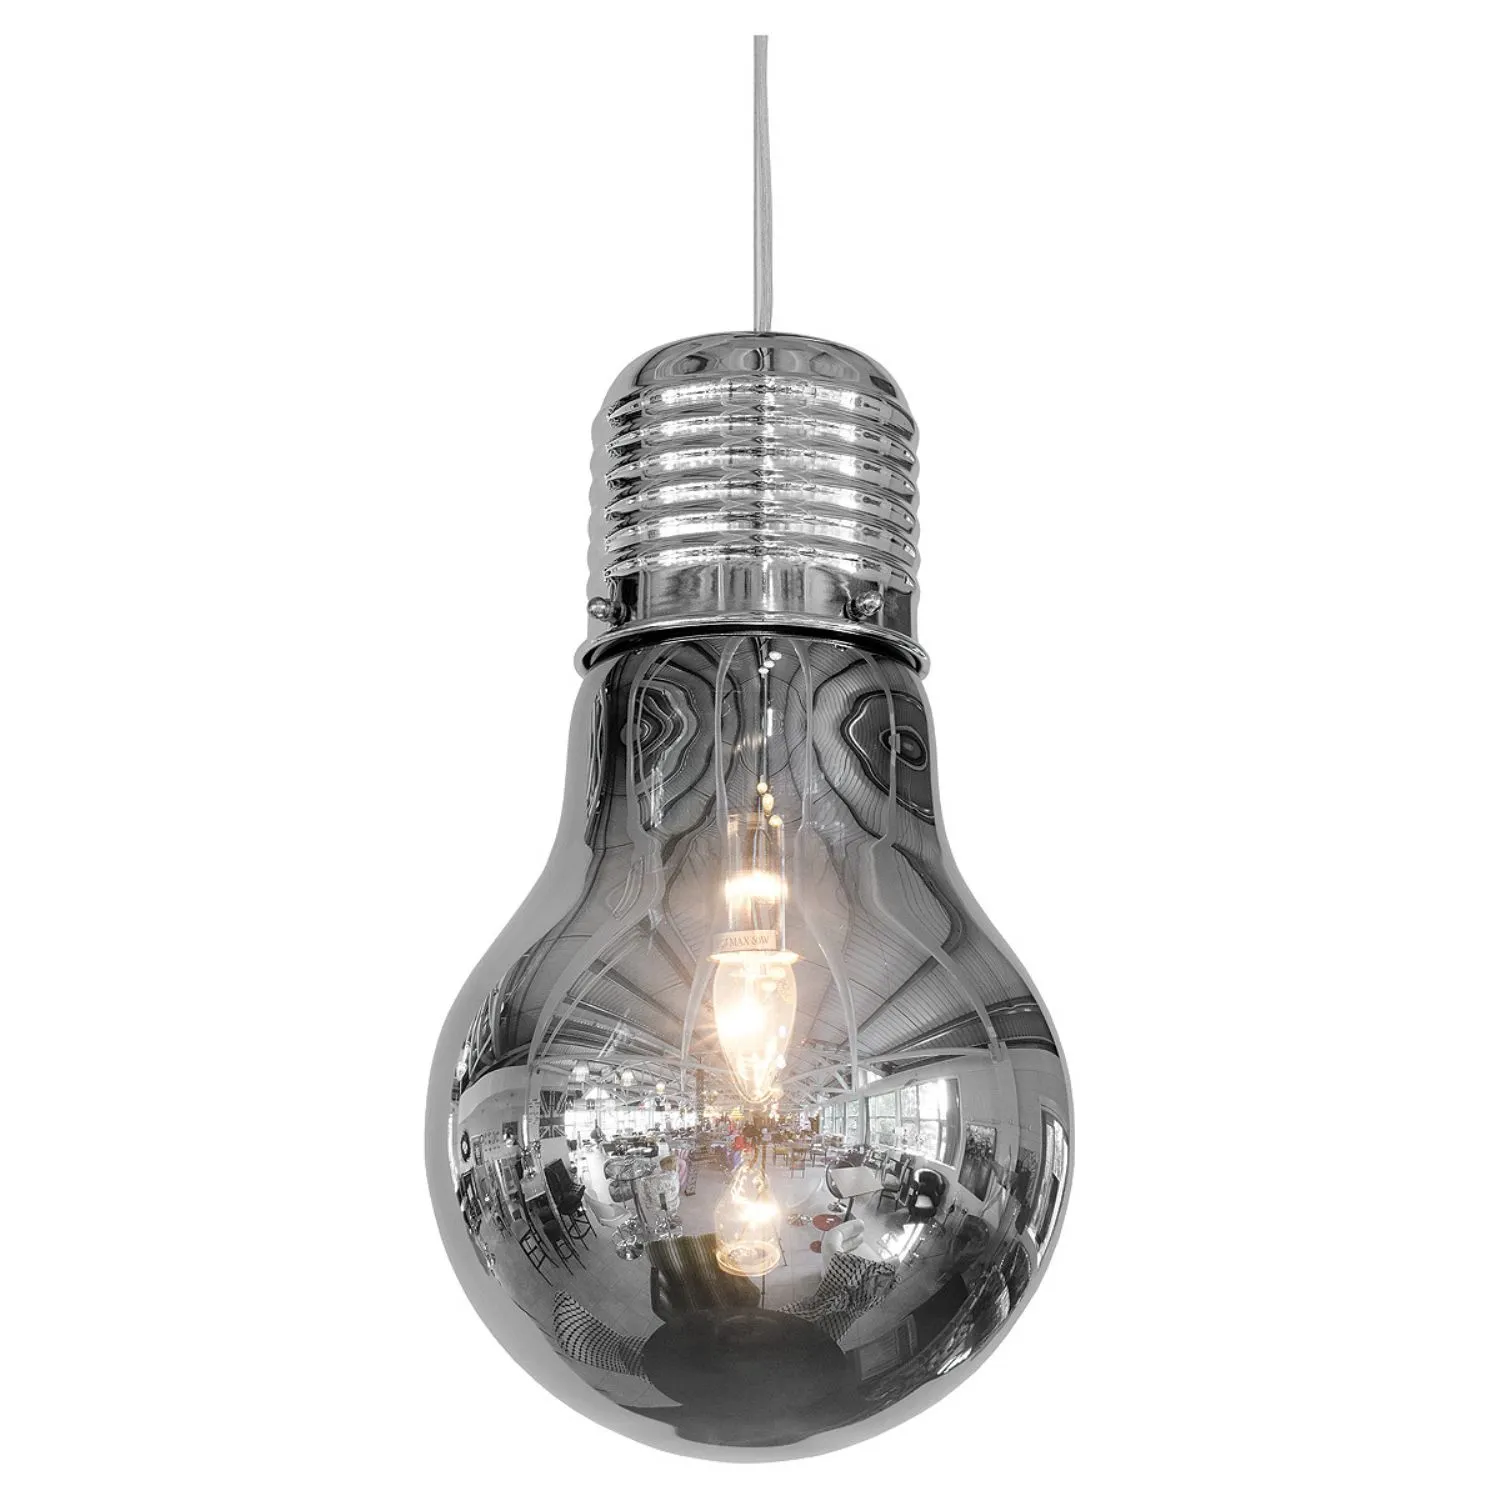 Smoked Bulb Shaped Ceiling Lamp